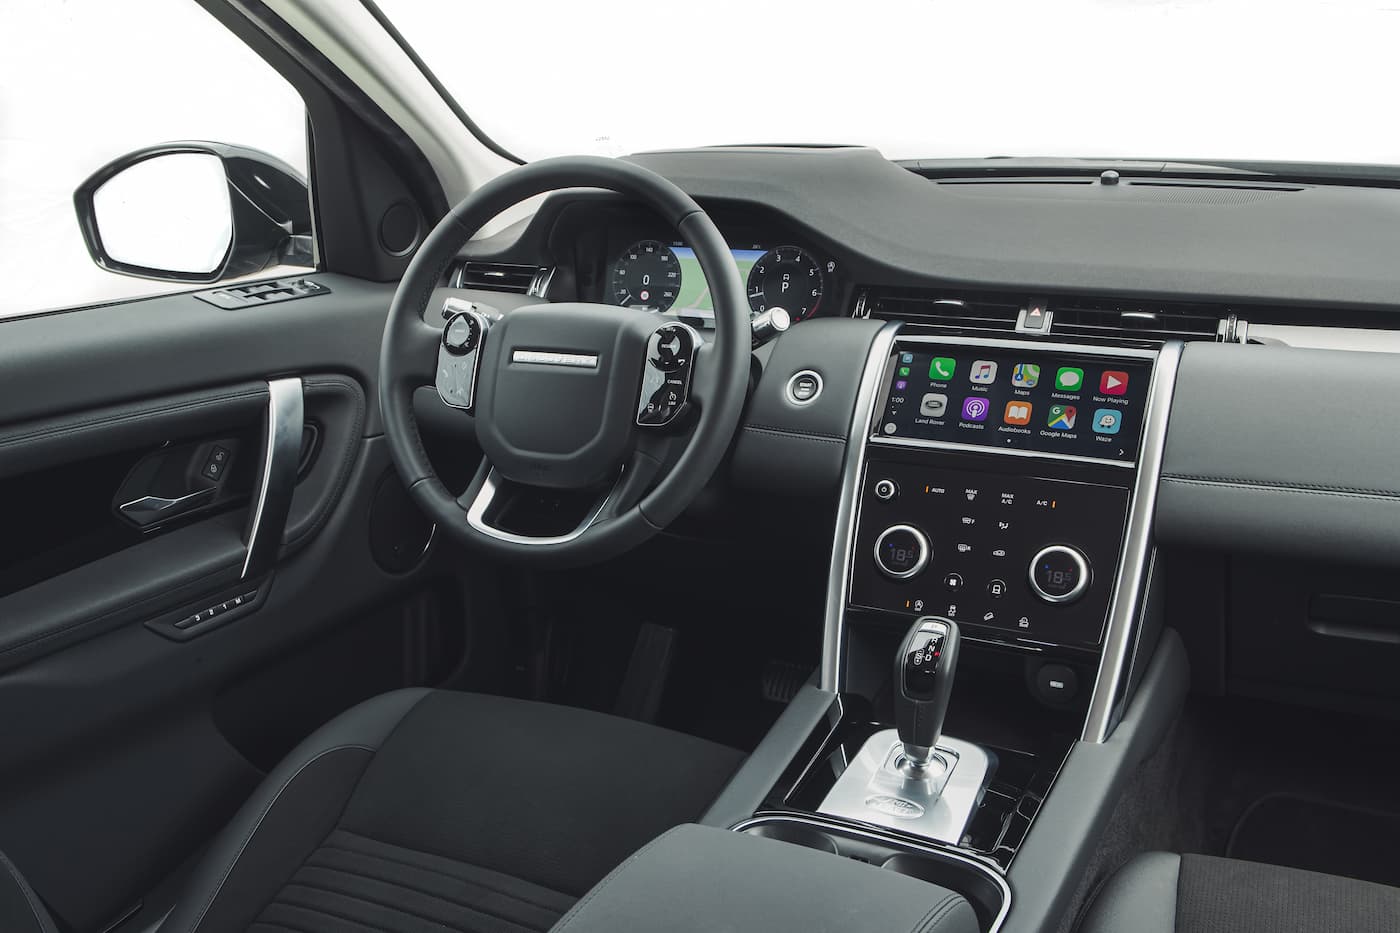 //images.ctfassets.net/uaddx06iwzdz/5XPO9yft9AFHZEOnZ35FOD/d7102a134065558d55075c13979f6380/land-rover-discovery-sport-interior.jpg "Land Rover Discovery Sport Interieur"